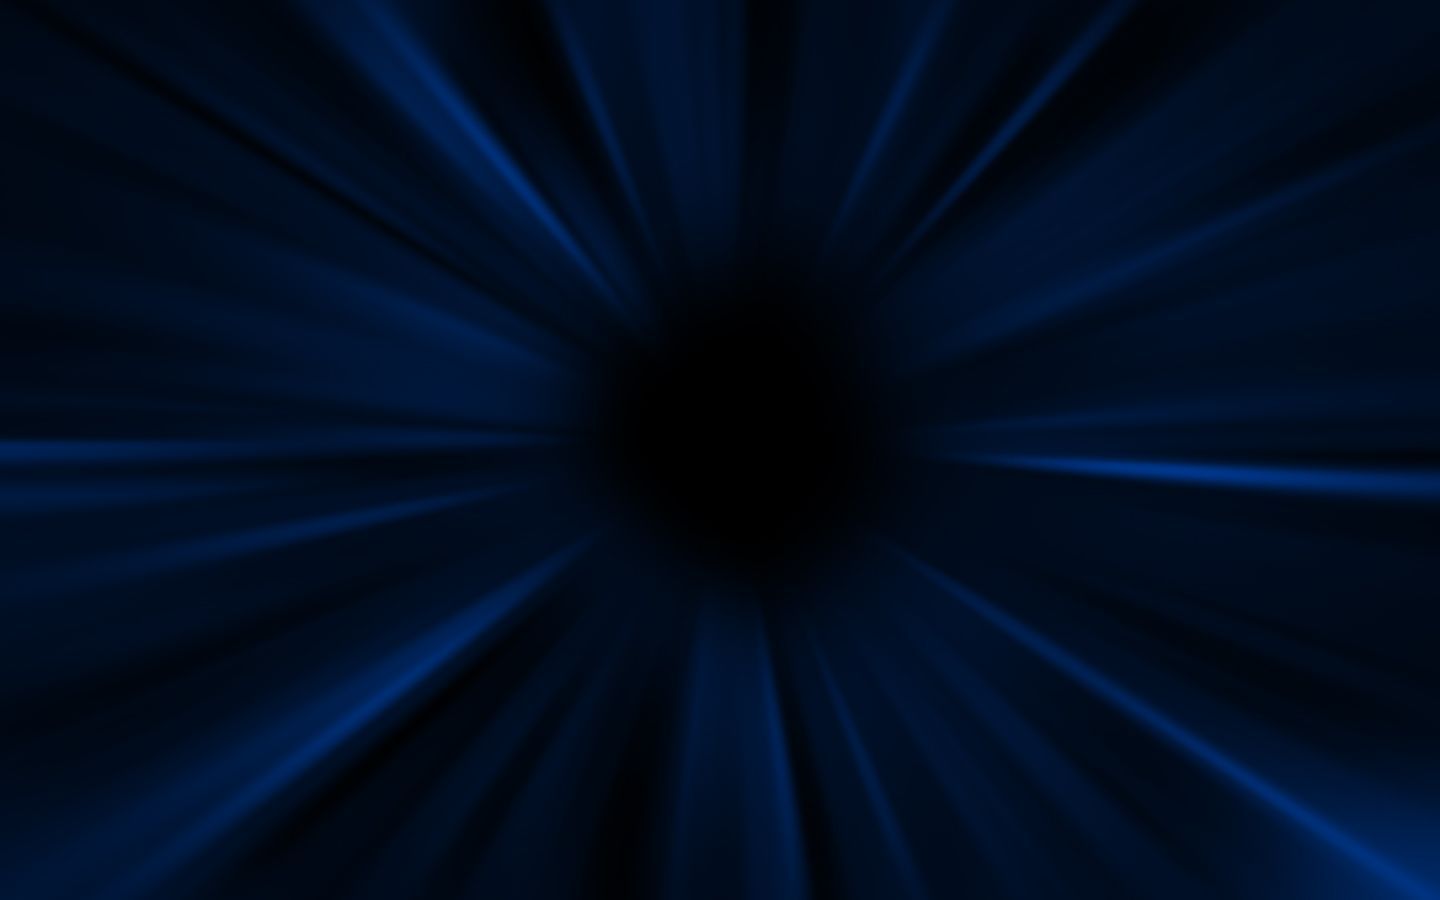 Dark Blue Wallpaper for mobile phone, tablet, desktop computer and other devices HD and 4K. Dark blue wallpaper, Royal blue wallpaper, Blue background wallpaper